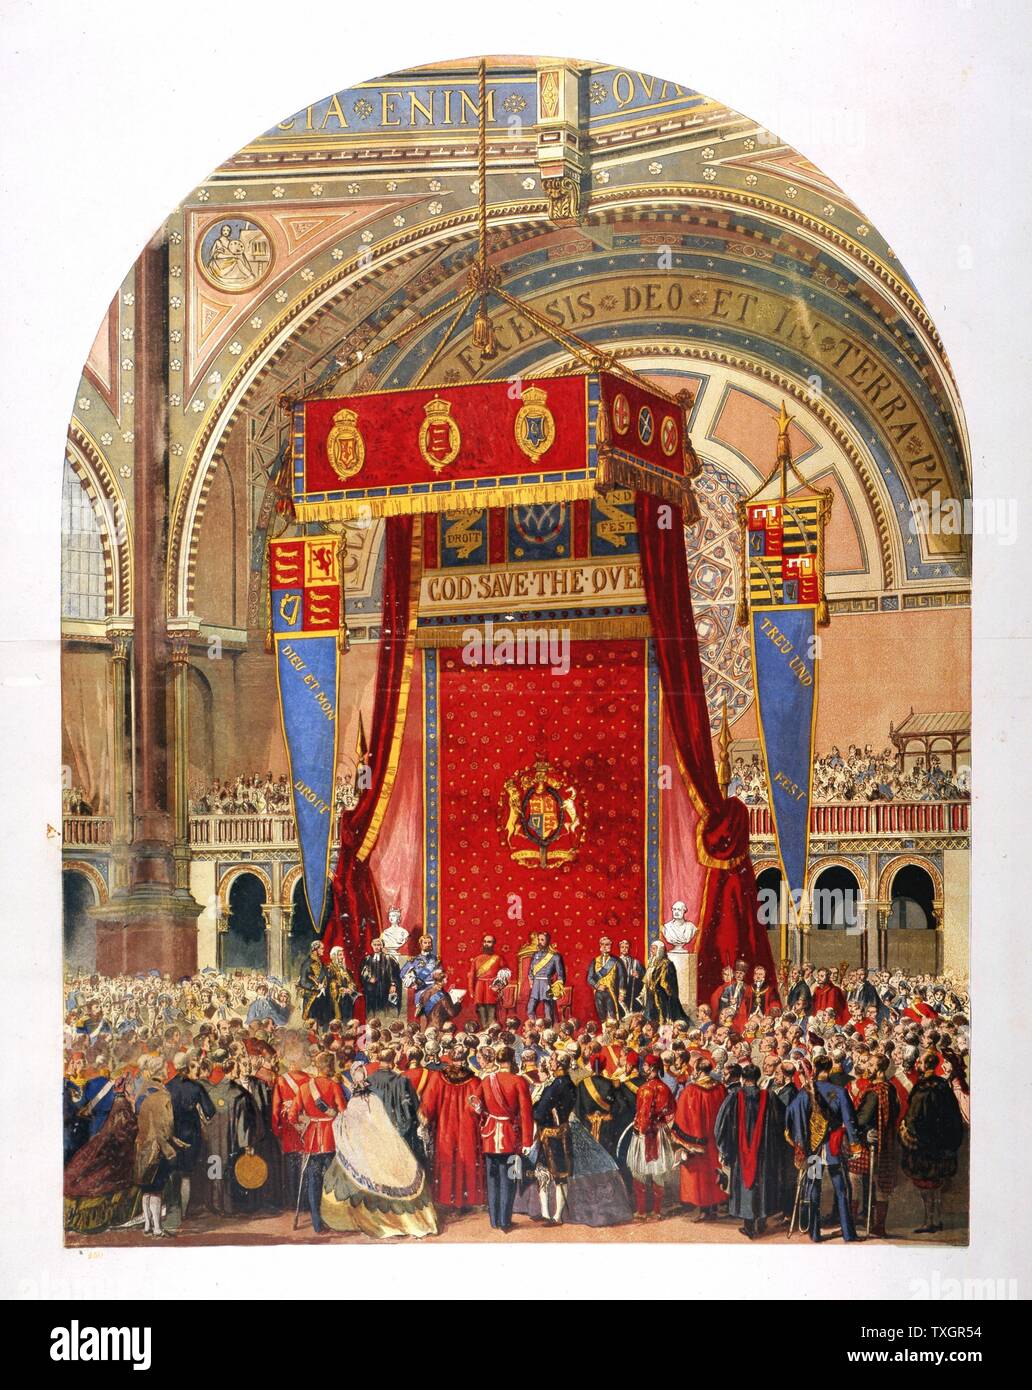 Opening of the International Exhibition of 1862 in the Crystal Palace by Queen Victoria's cousin, George, Duke of Cambridge 1862 London Chromolithograph Stock Photo